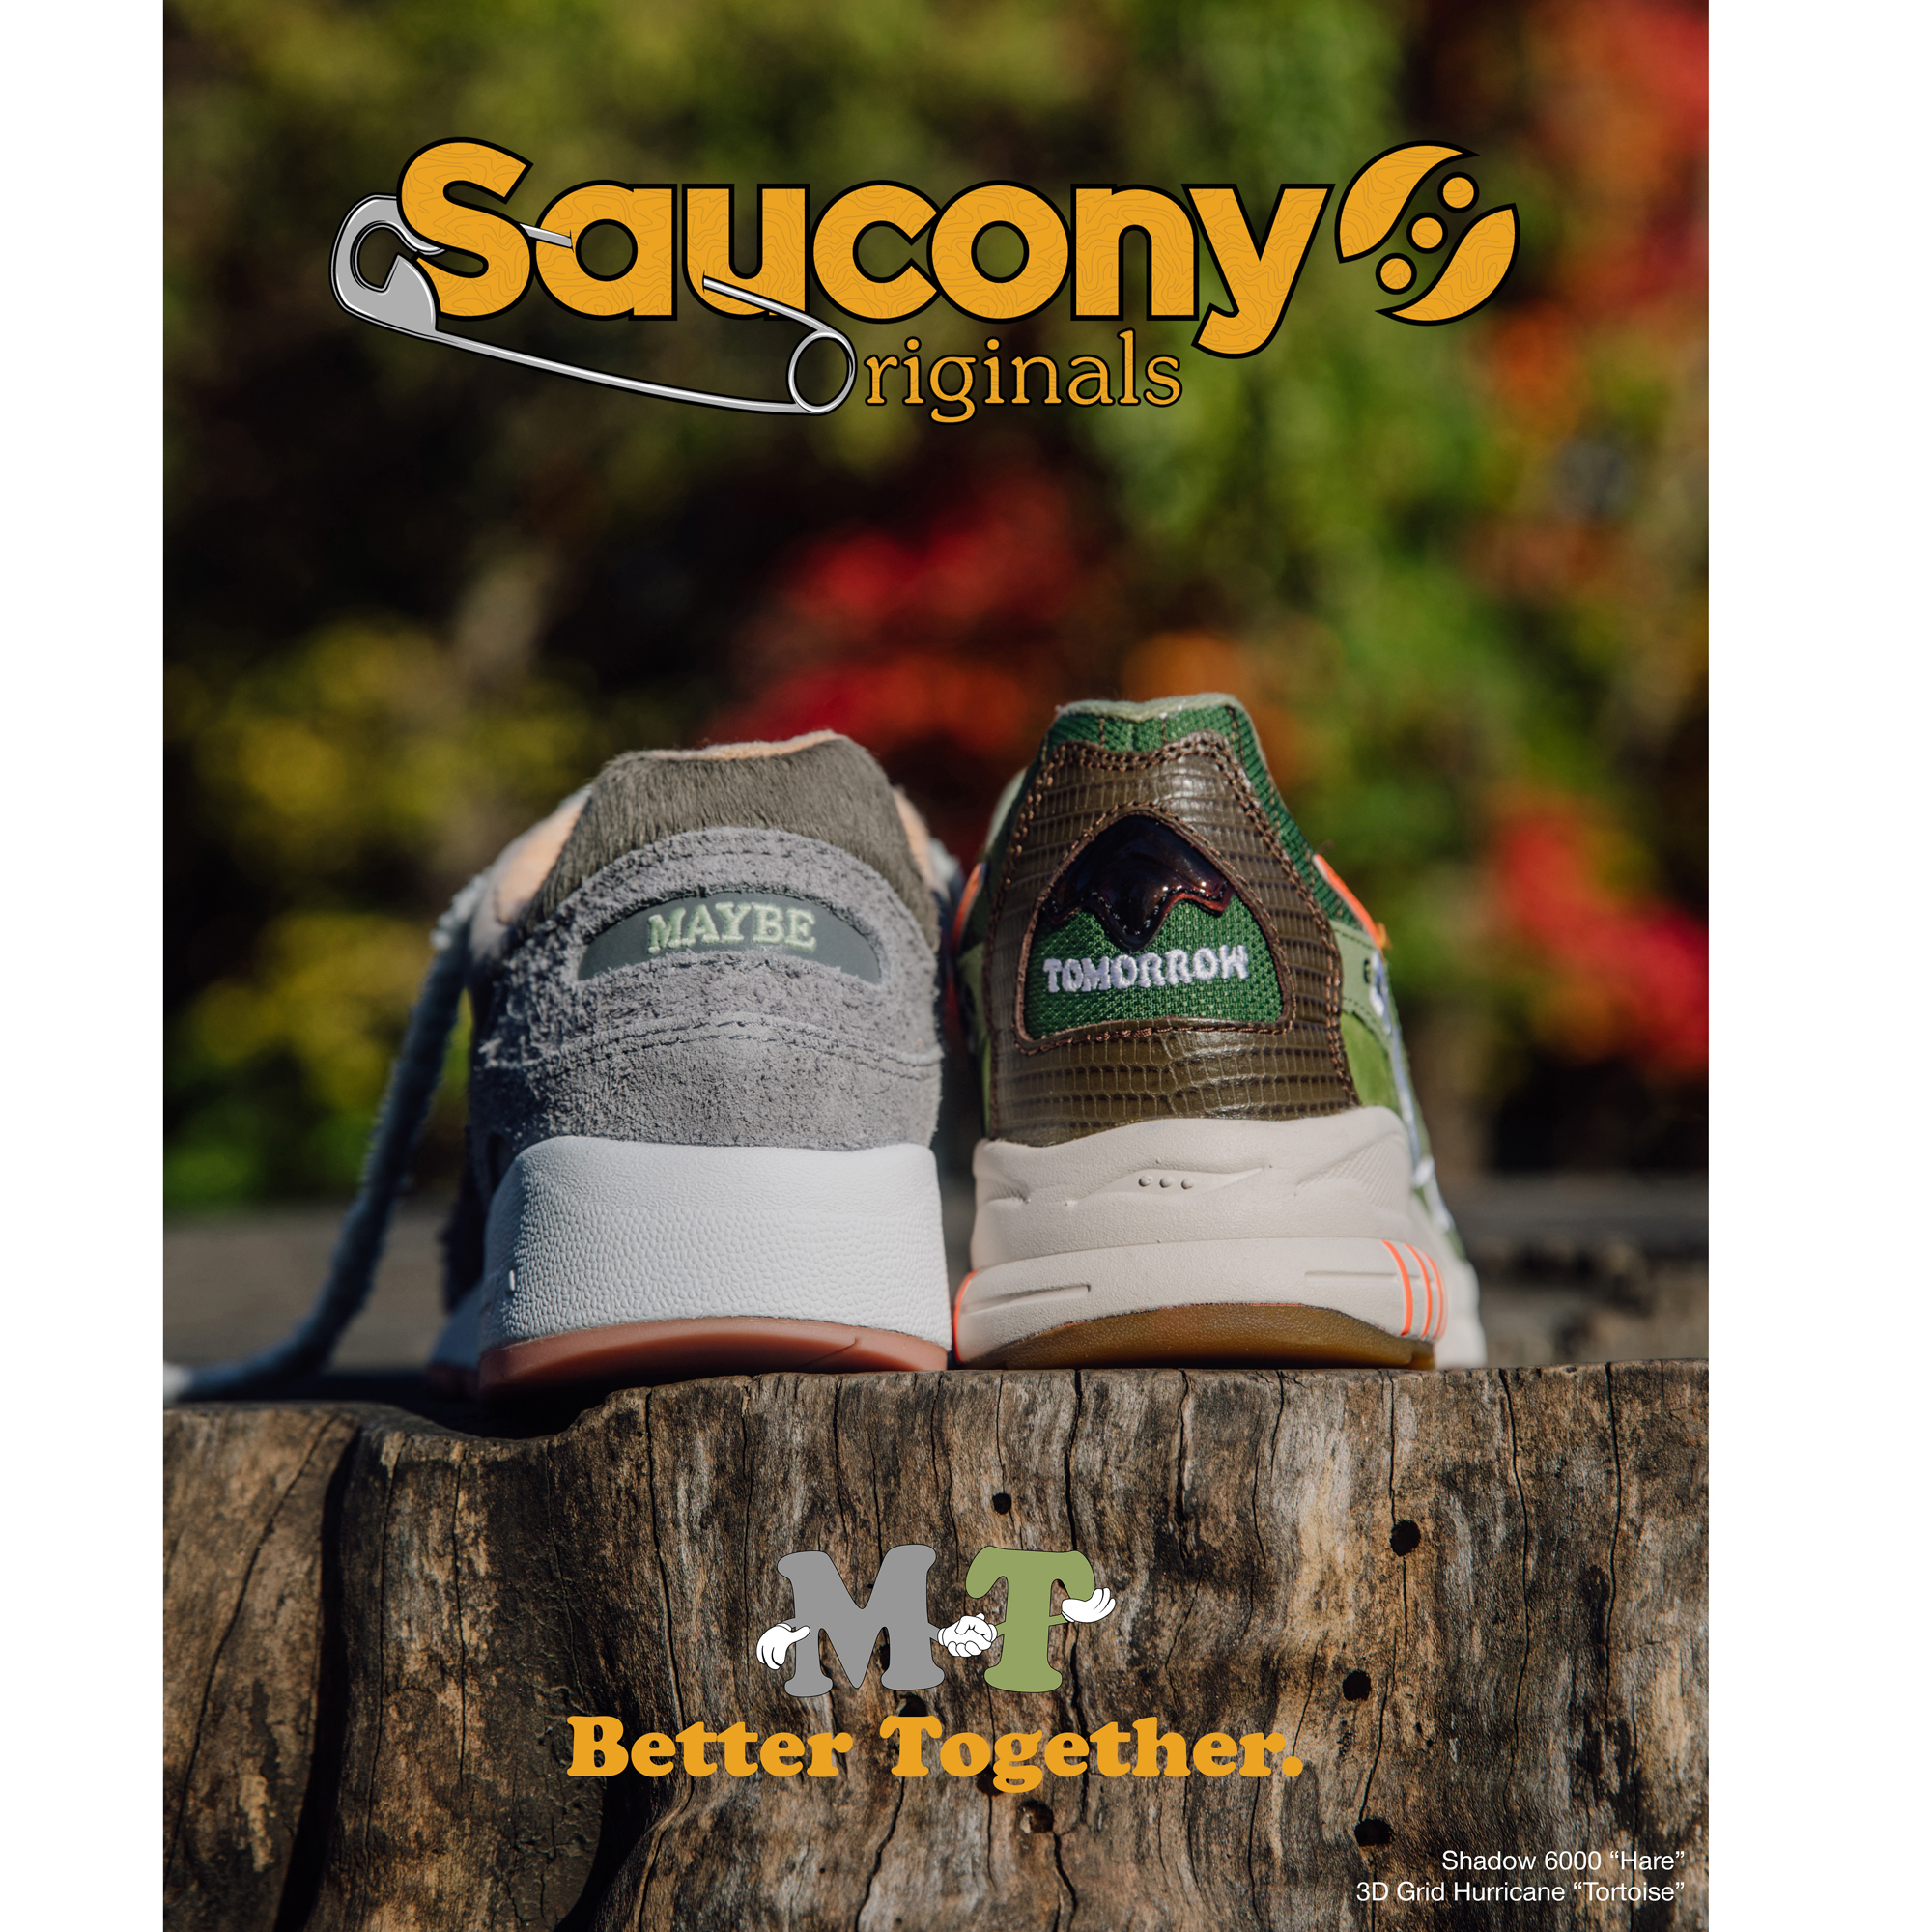 Maybe Tomorrow x Saucony “Better Together” Capsule